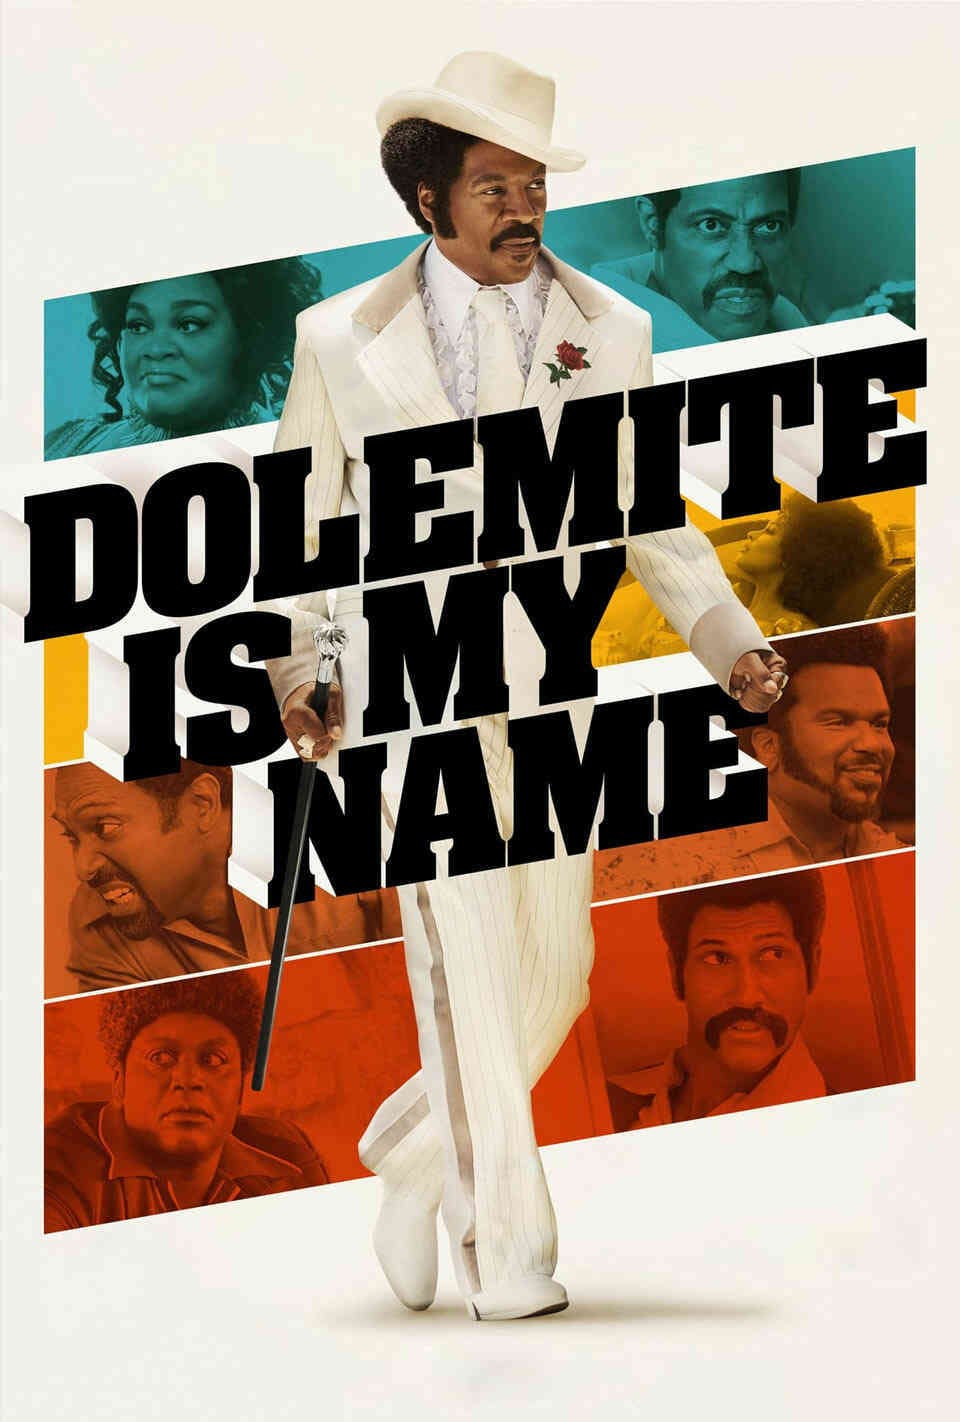 Read Dolemite Is My Name screenplay.